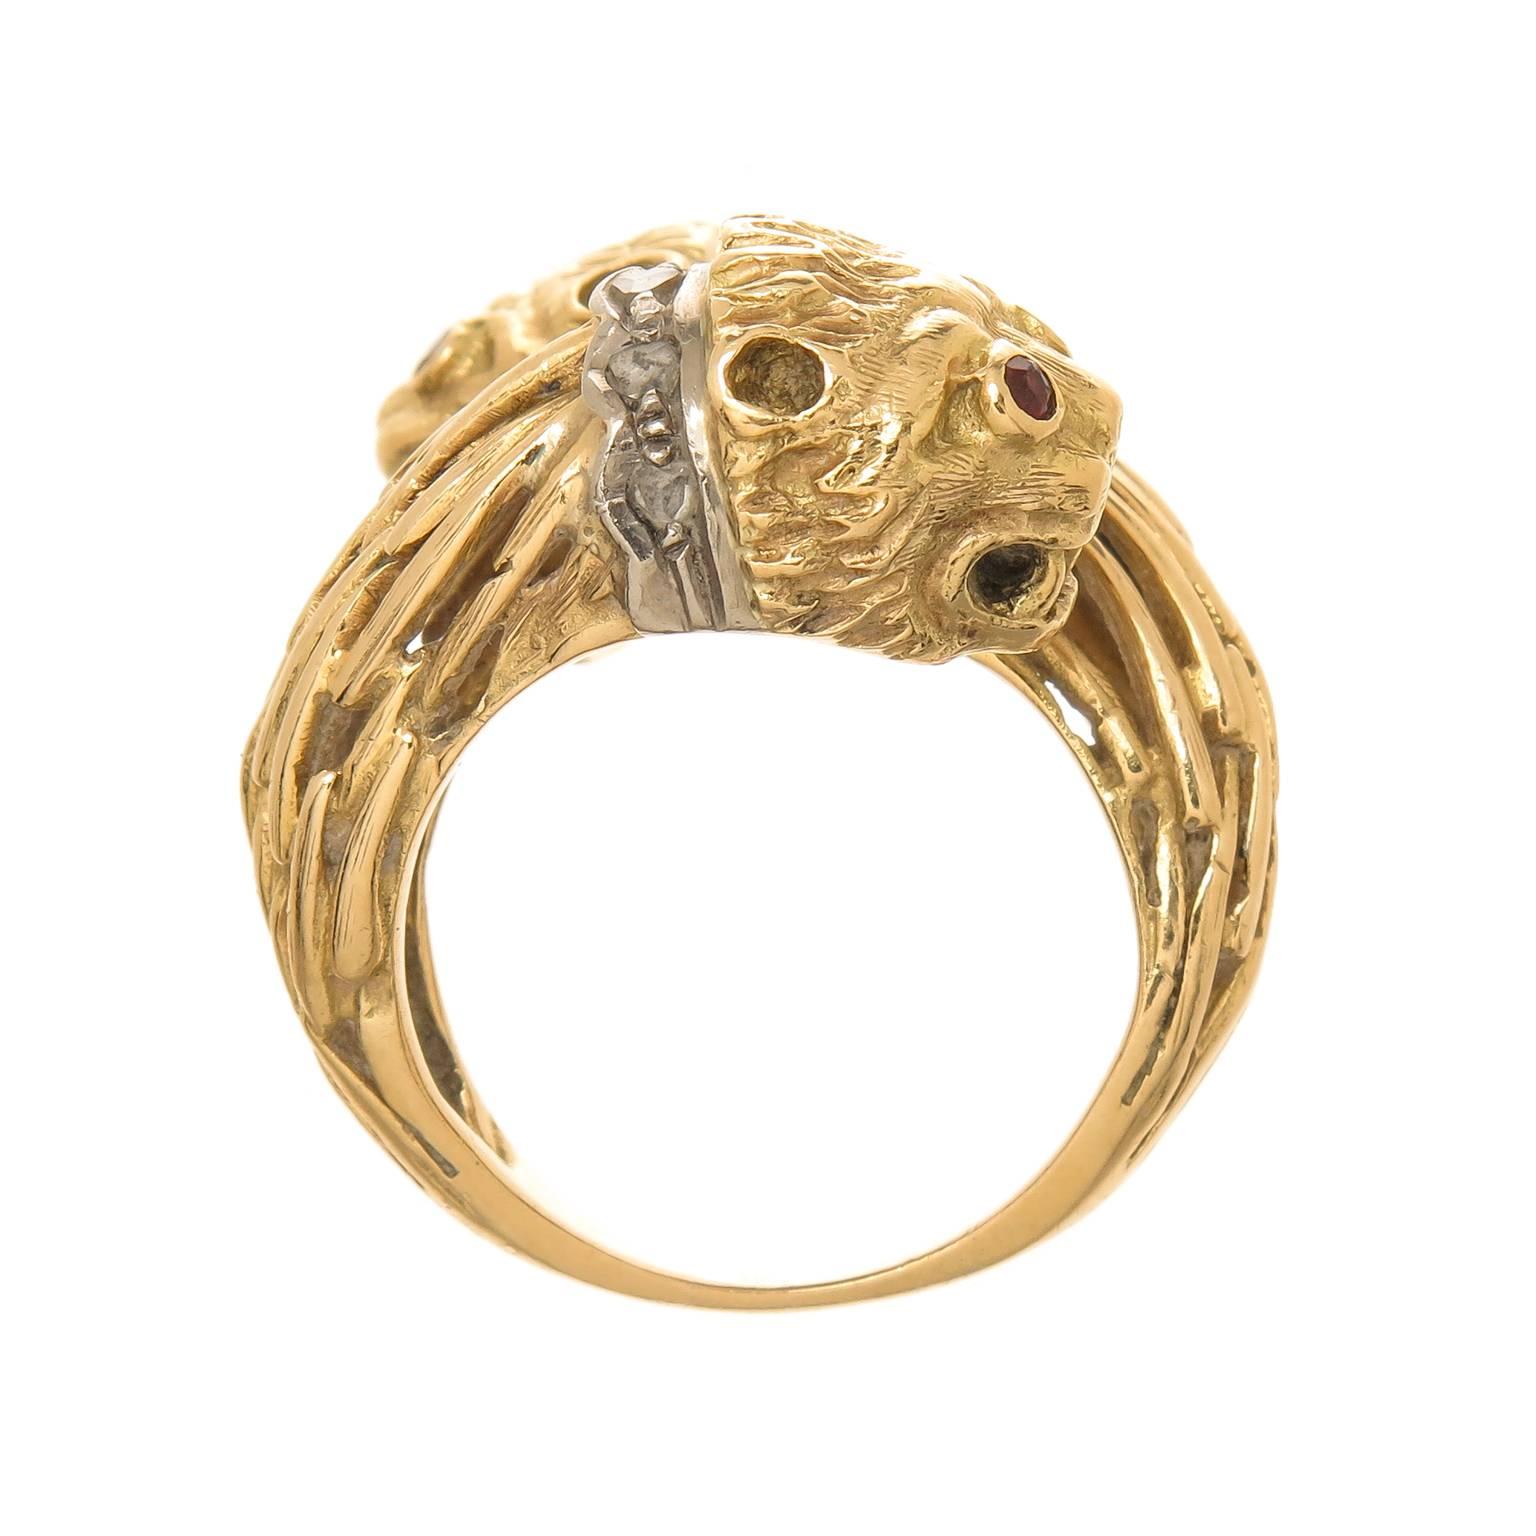 Circa 1970 Lalaounis 18K Yellow Gold Double Lion Head Bypass Ring, Hand textured and Having a White Gold Collar set with Diamonds and further accented with Ruby Eyes. Measuring 7/8 inch wide. Finger size = 6 1/2